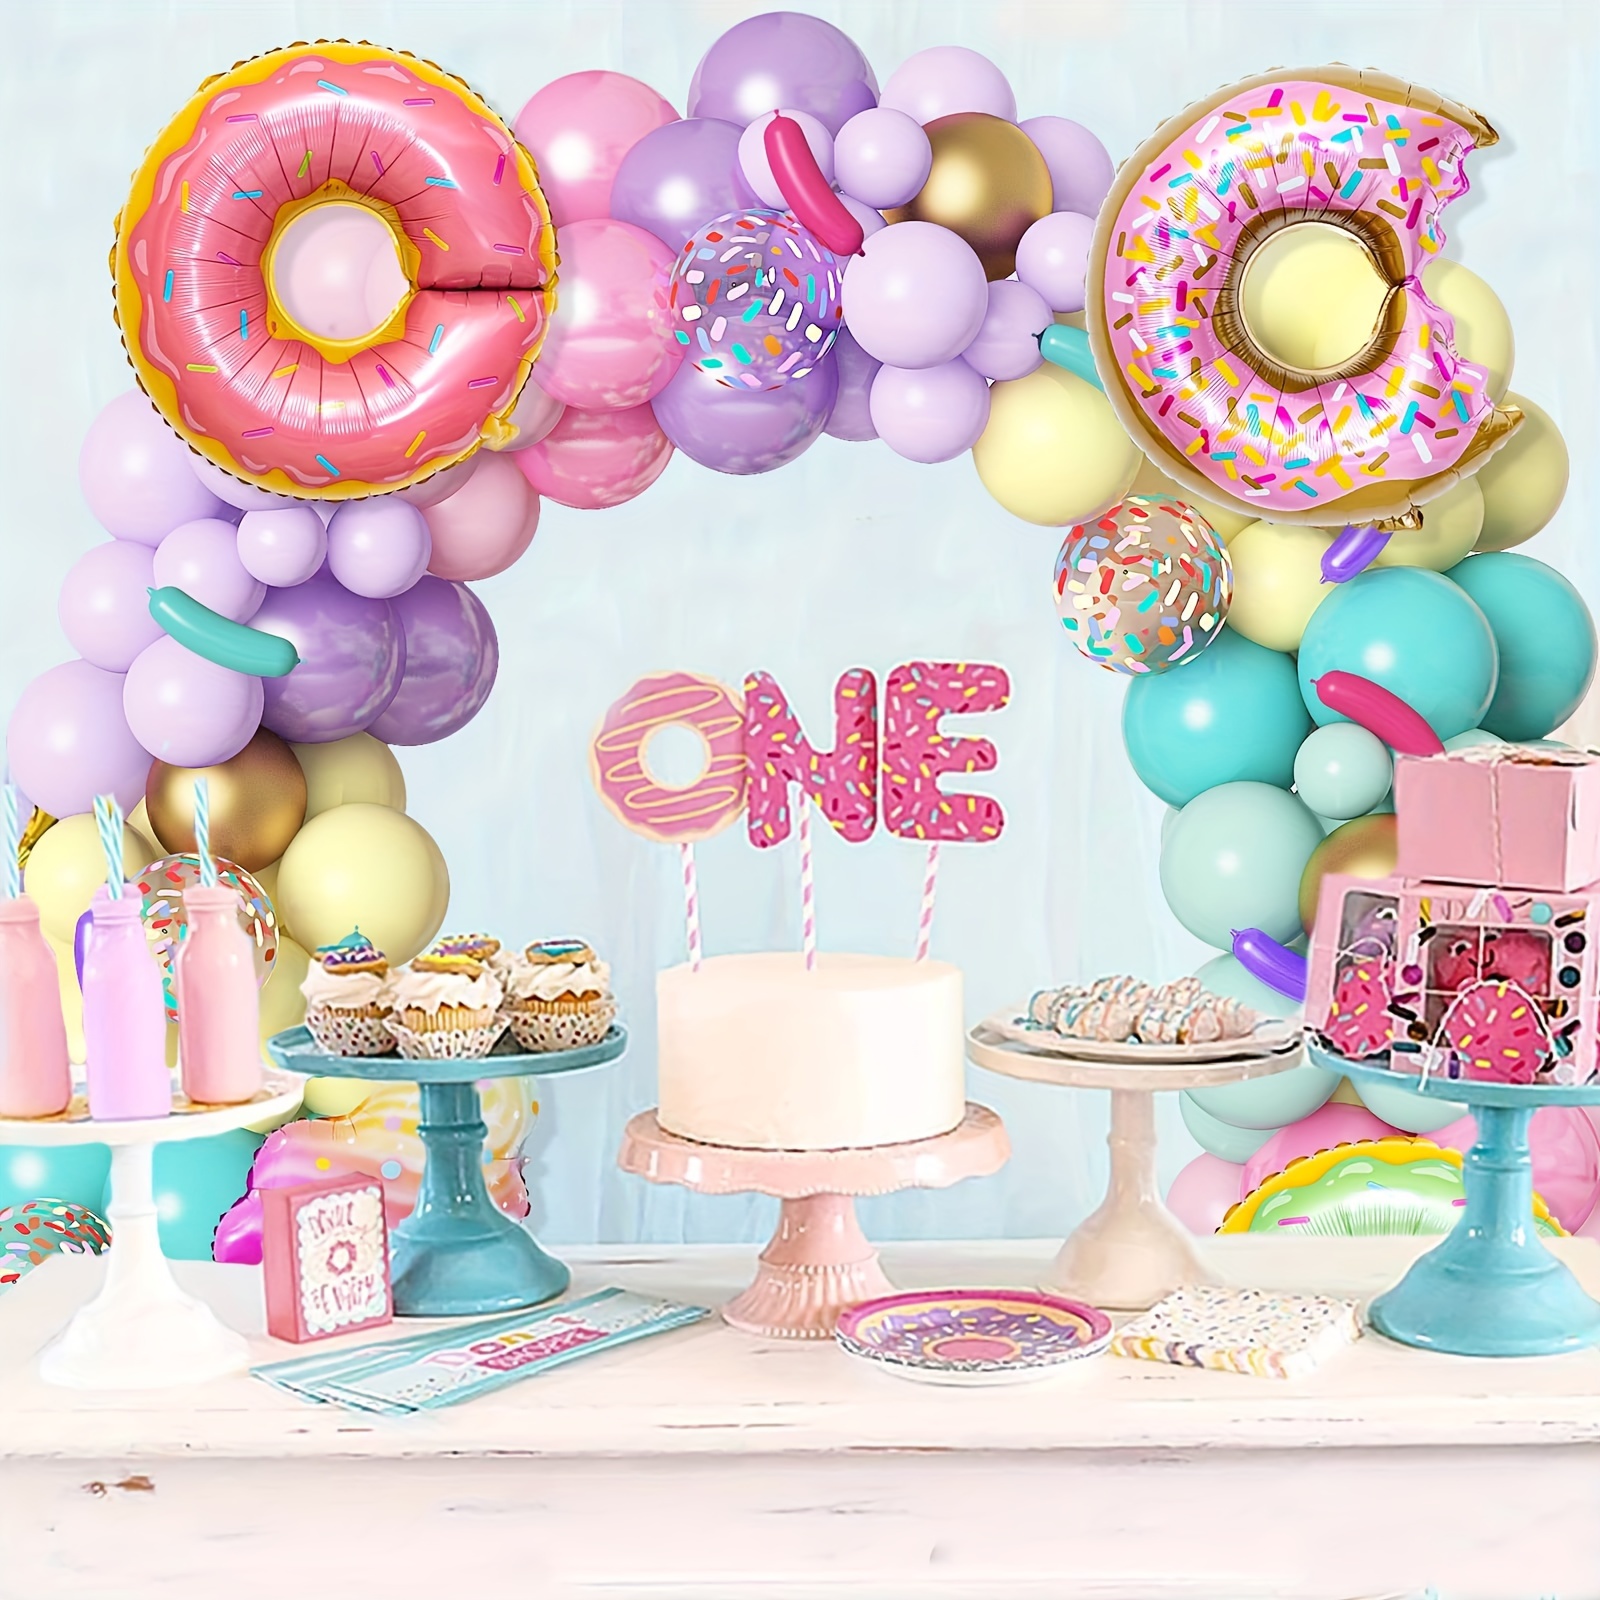 PINK PASTEL RAINBOW Party Balloons Girls Birthday Party